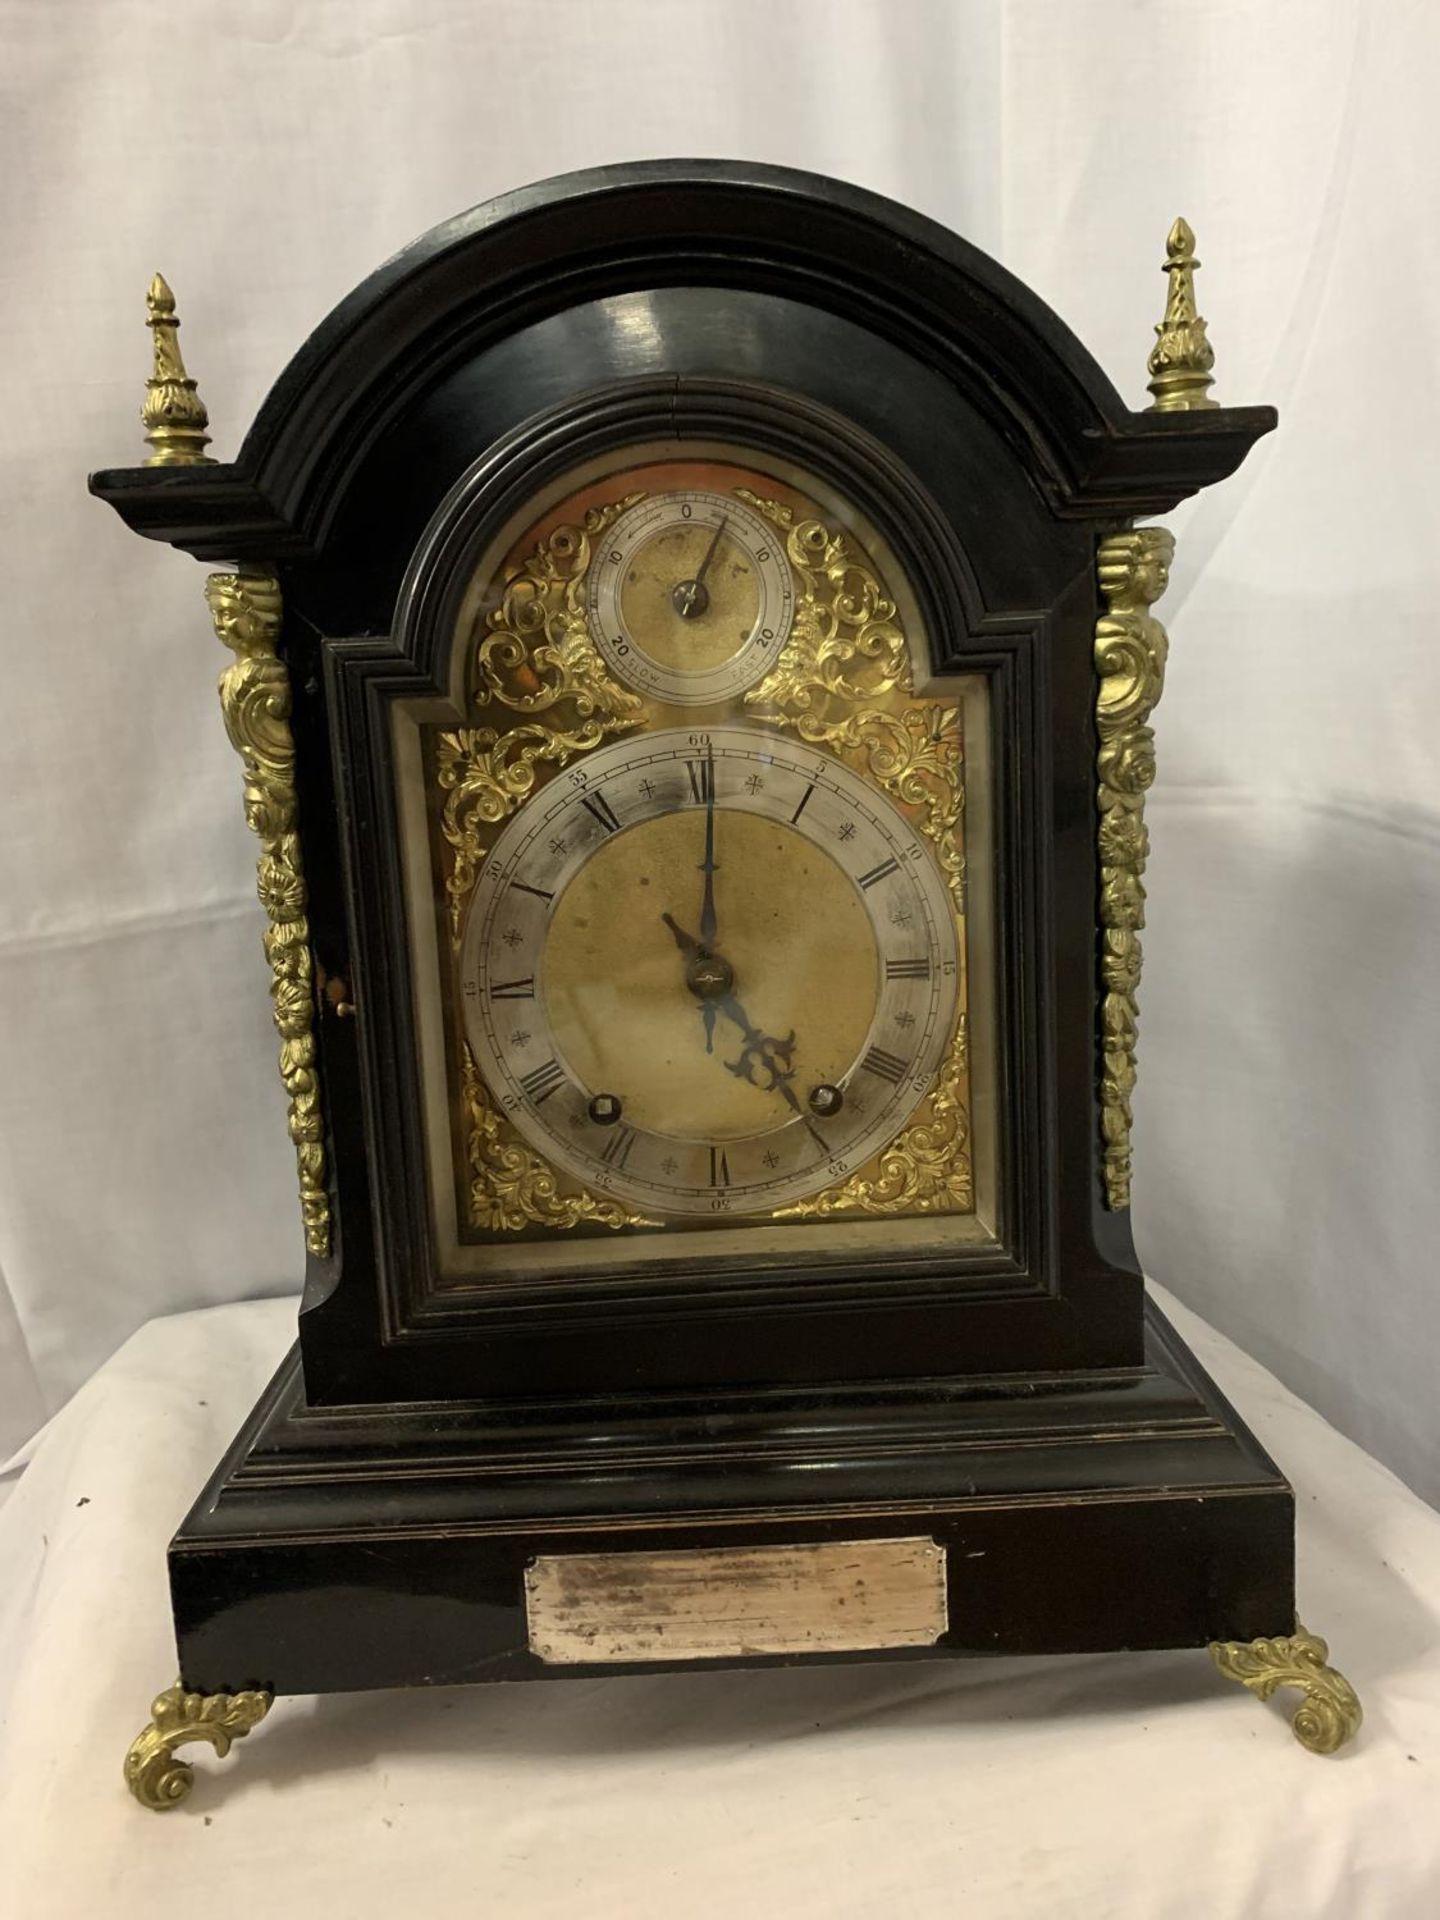 A VICTORIAN EBONISED BRACKET CLOCK WITH SILVERISED DIAL, GILDED DECORATION AND PIERCED SIDE